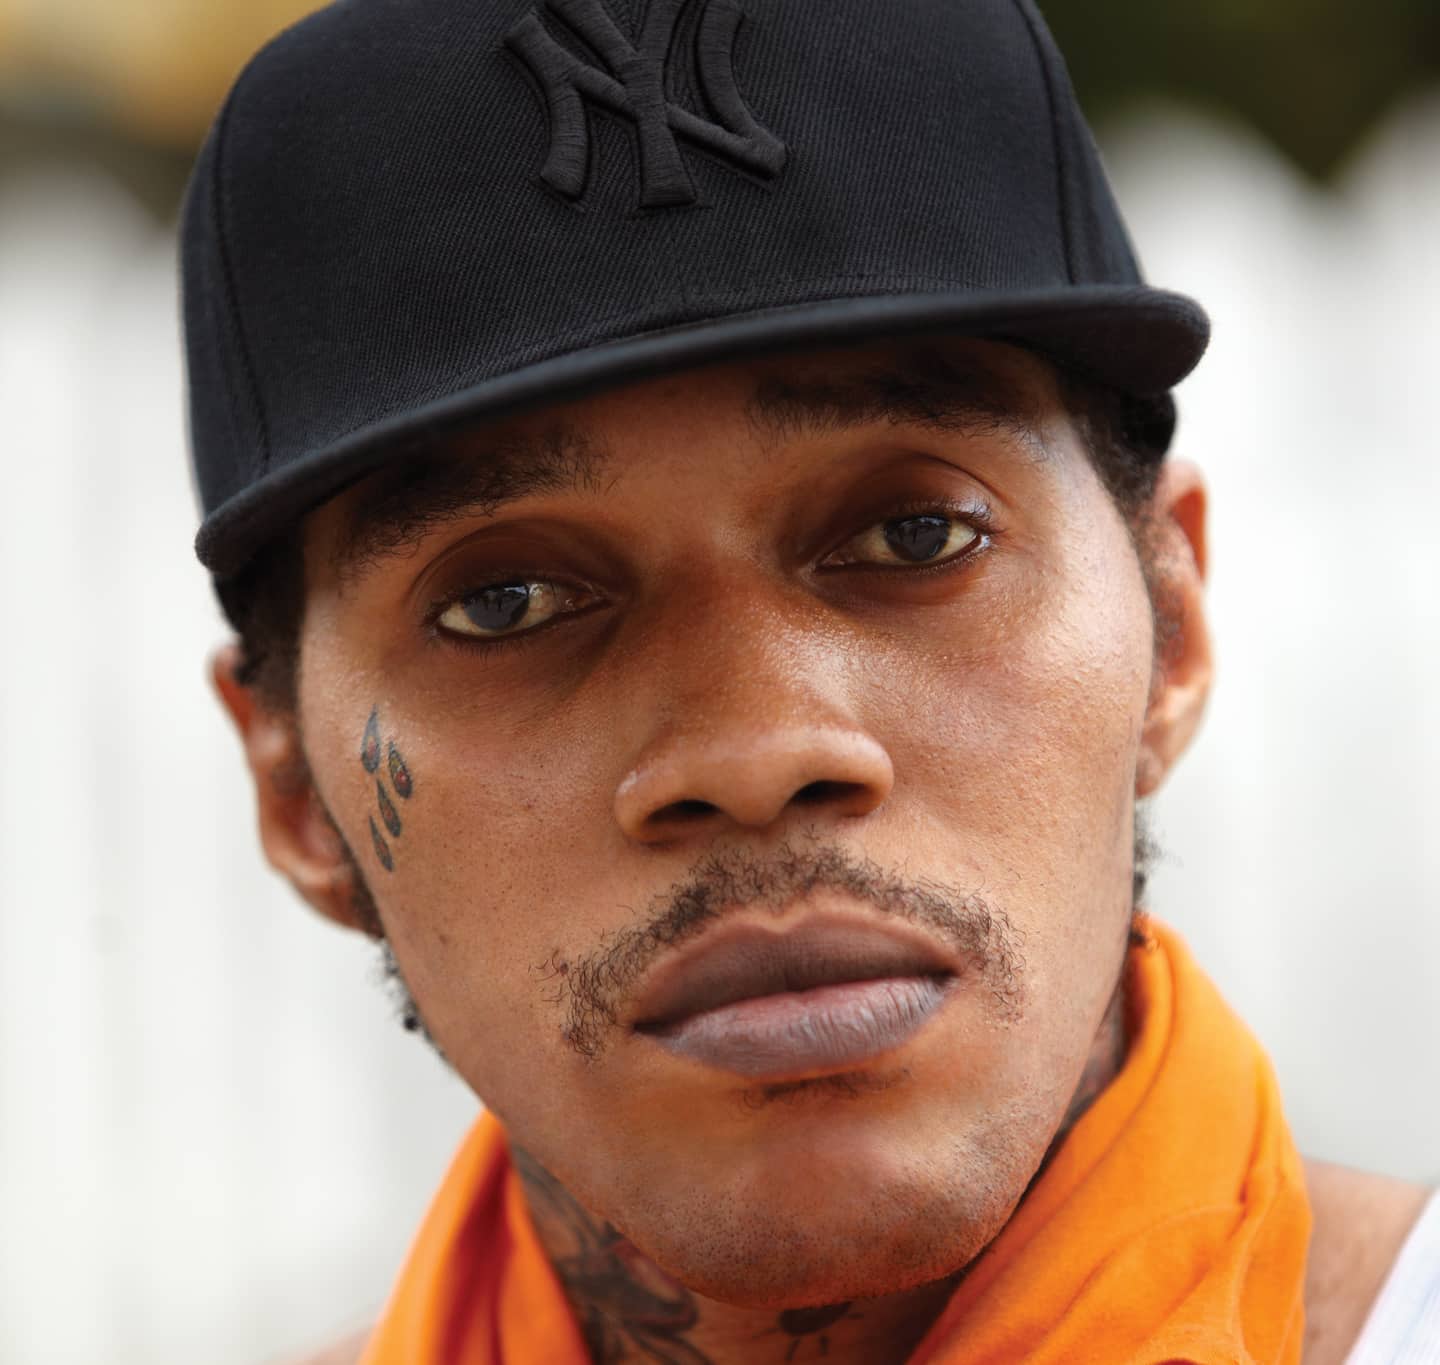 The 46-year old son of father Norris Palmer and mother Teresa Palmer Vybz Kartel in 2022 photo. Vybz Kartel earned a  million dollar salary - leaving the net worth at  million in 2022